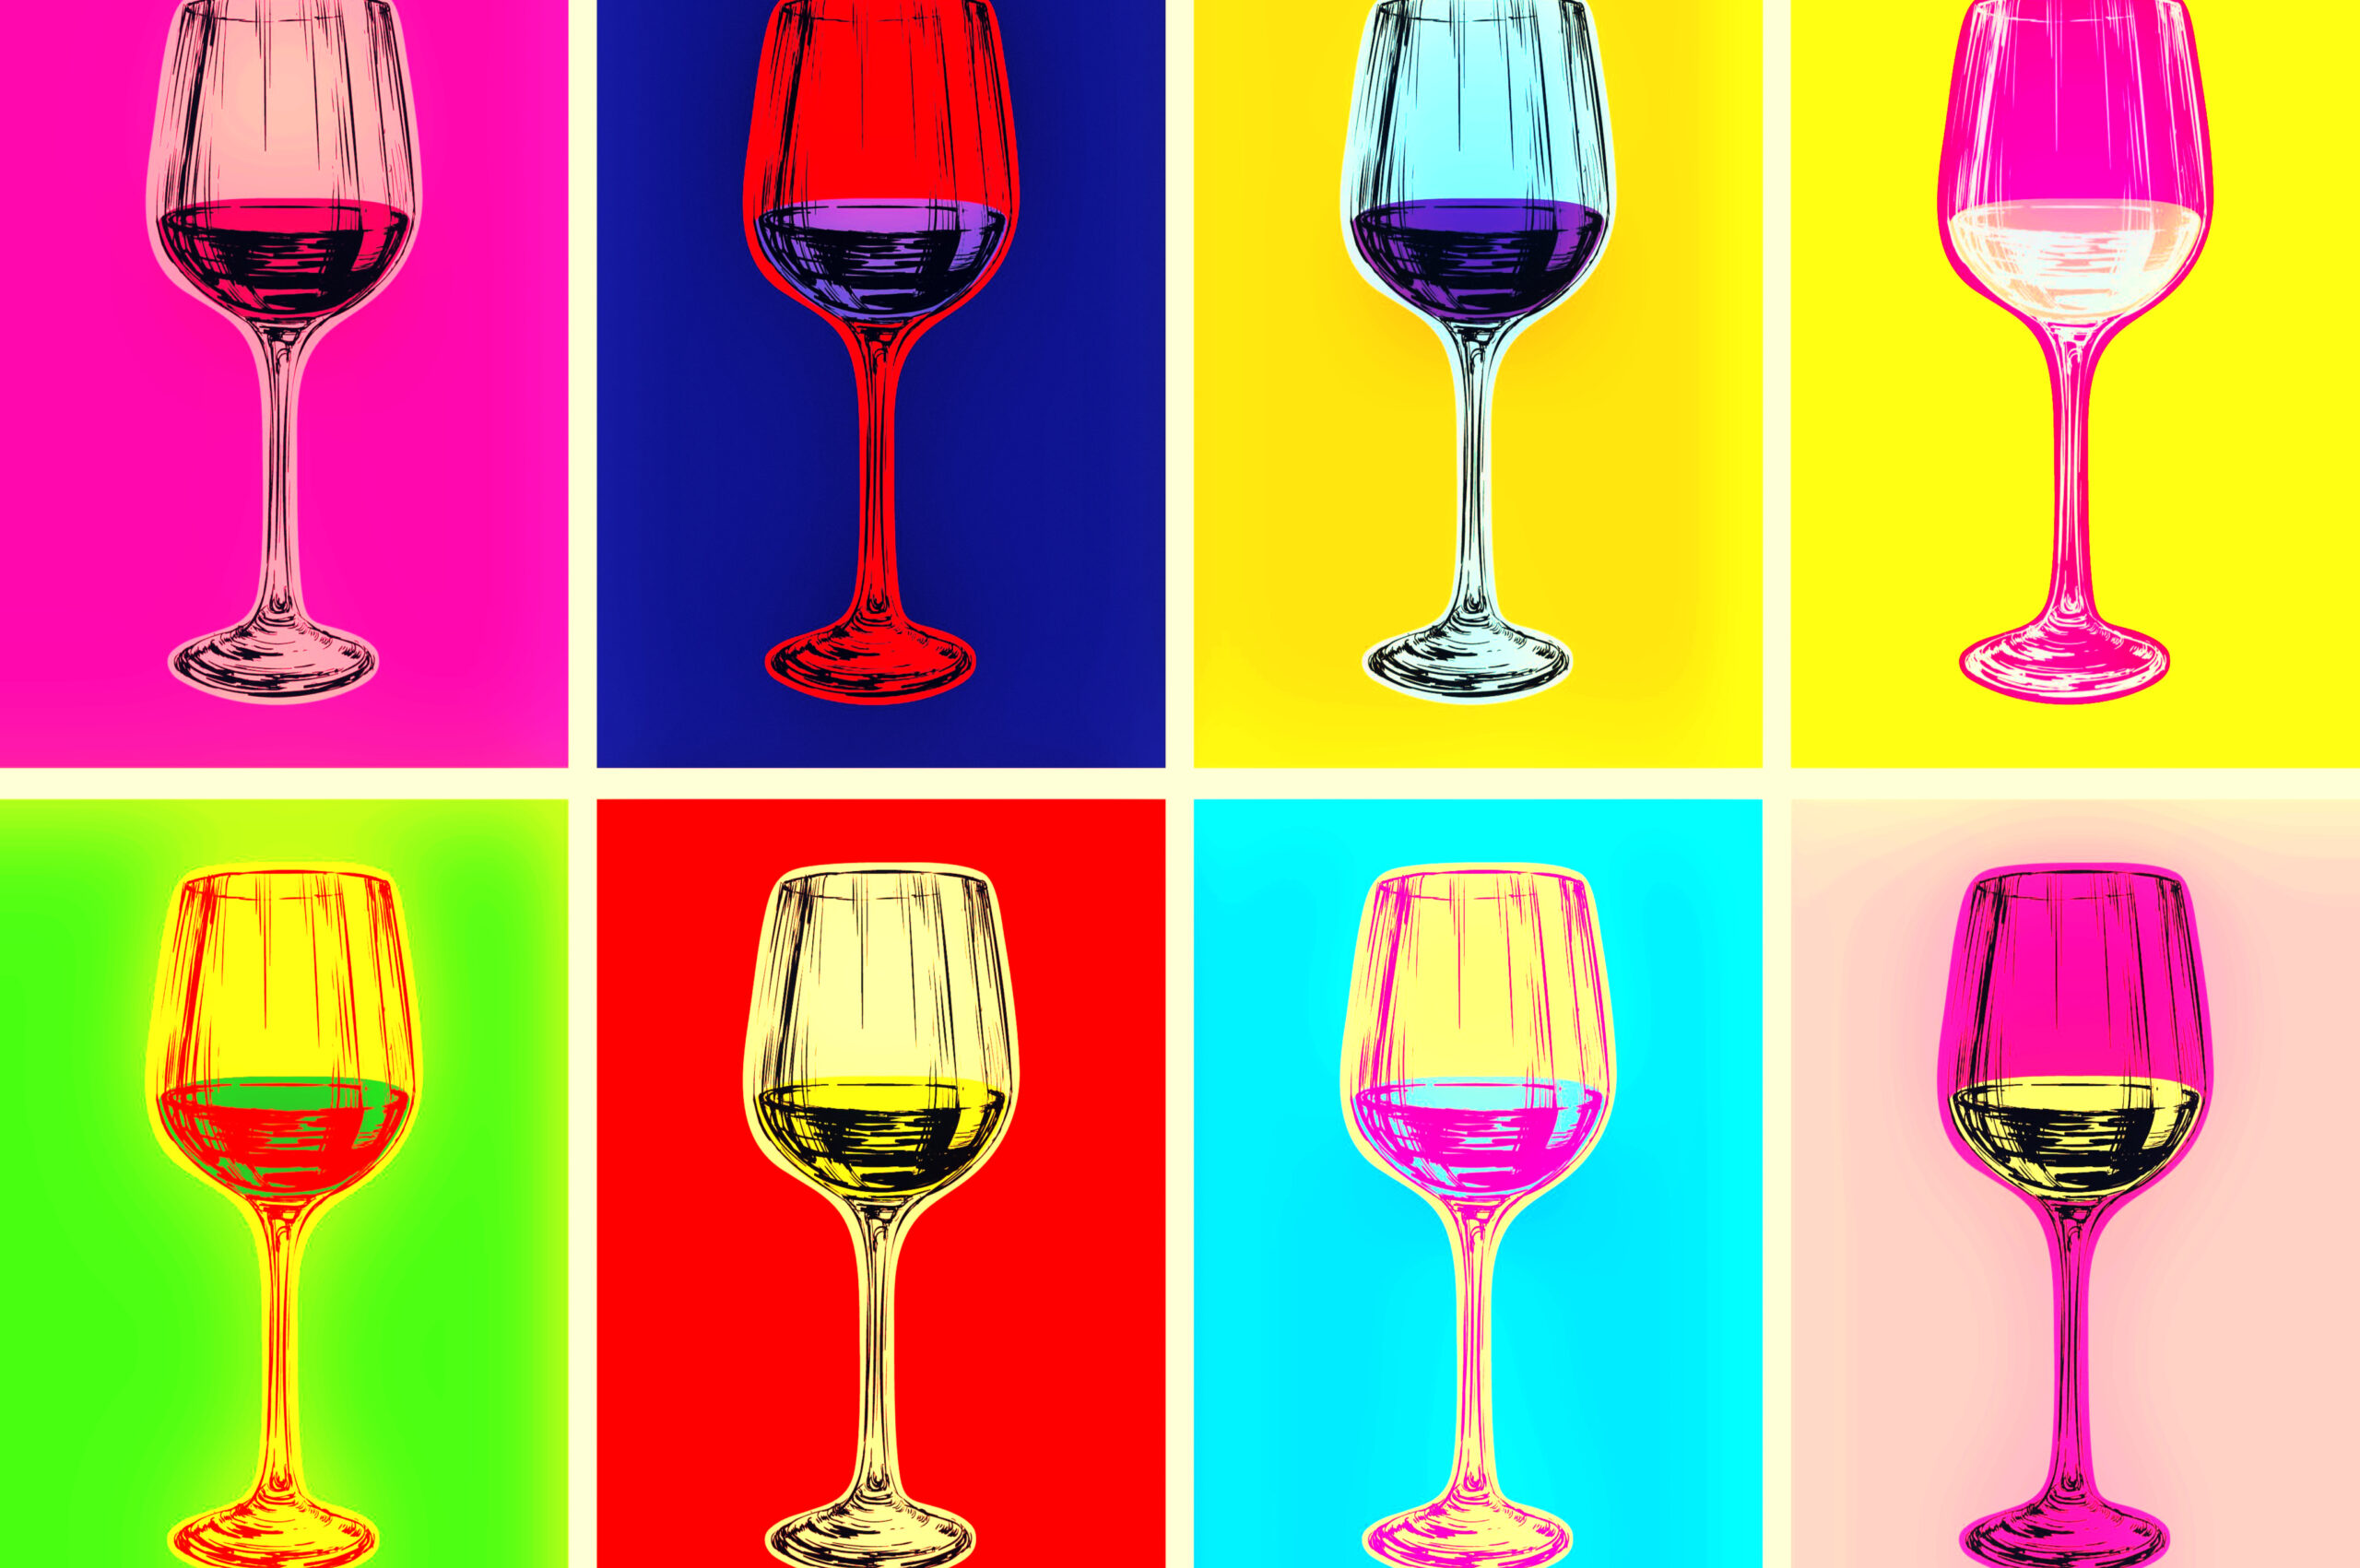 Eight hand drawn wine glasses on colored background in the style of Andy Warhol